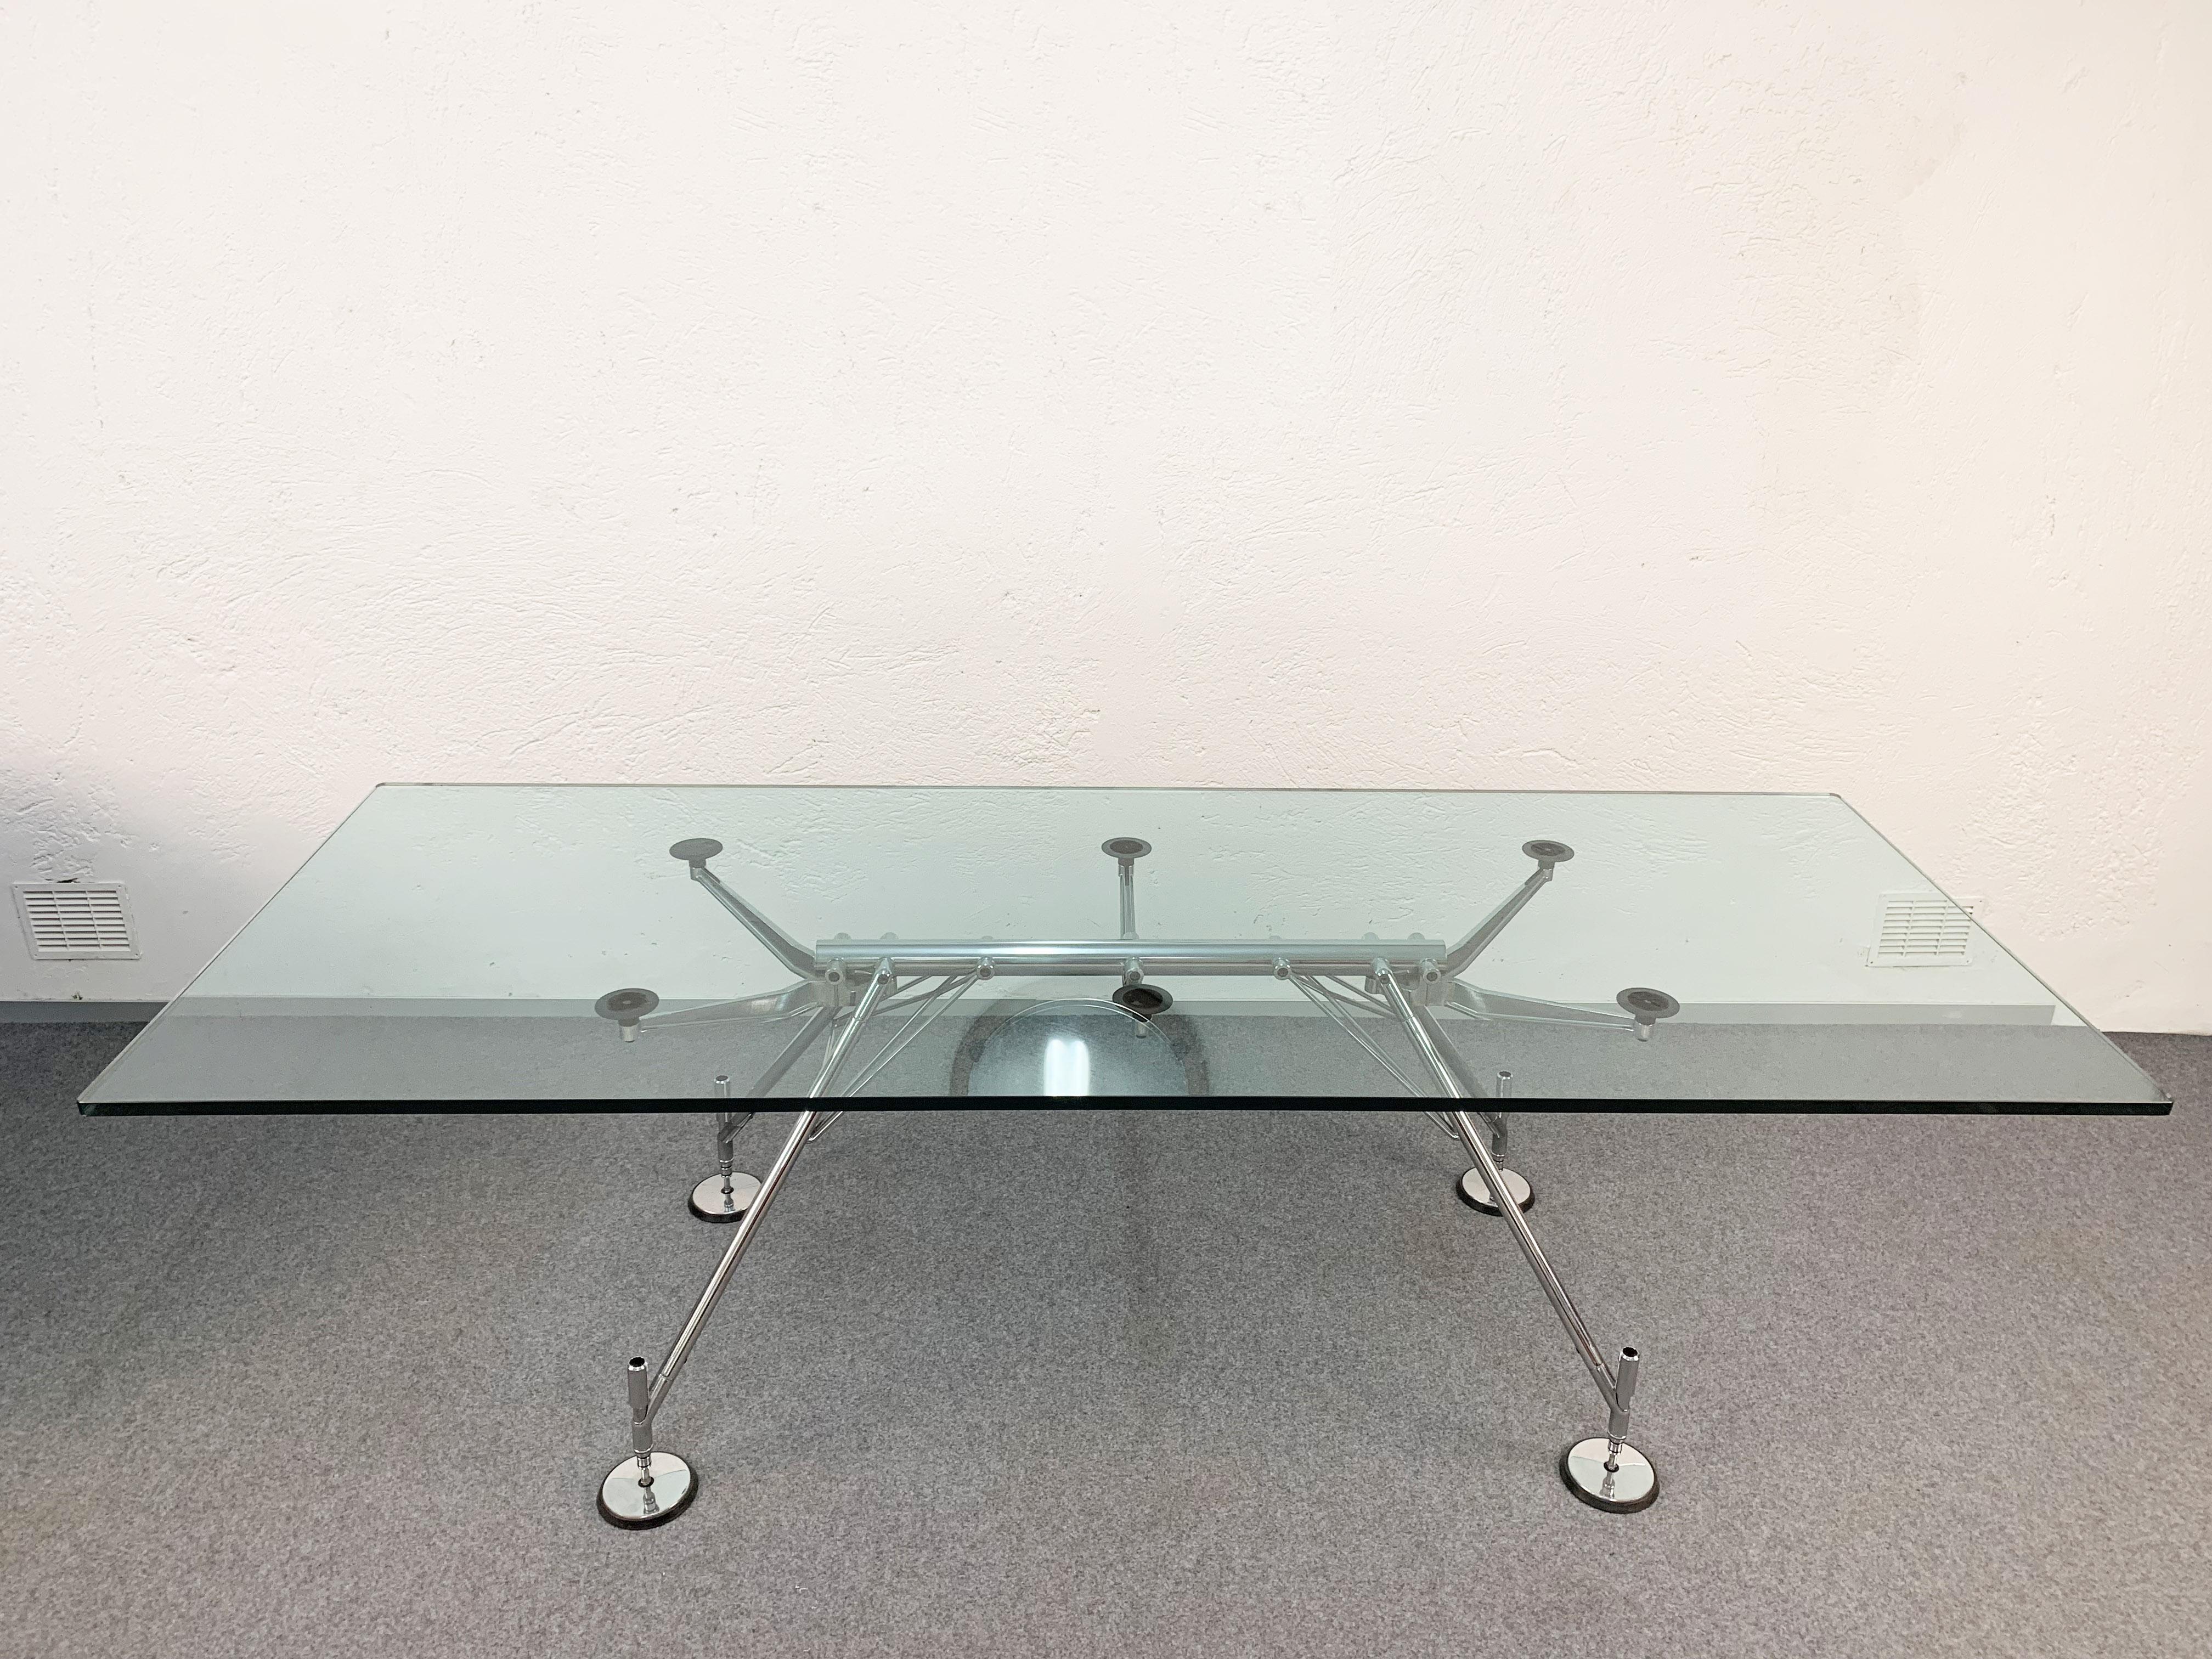 Tempered Norman Foster Chromed Metal and Glass Nomos Dining Table for Tecno, Italy, 1986